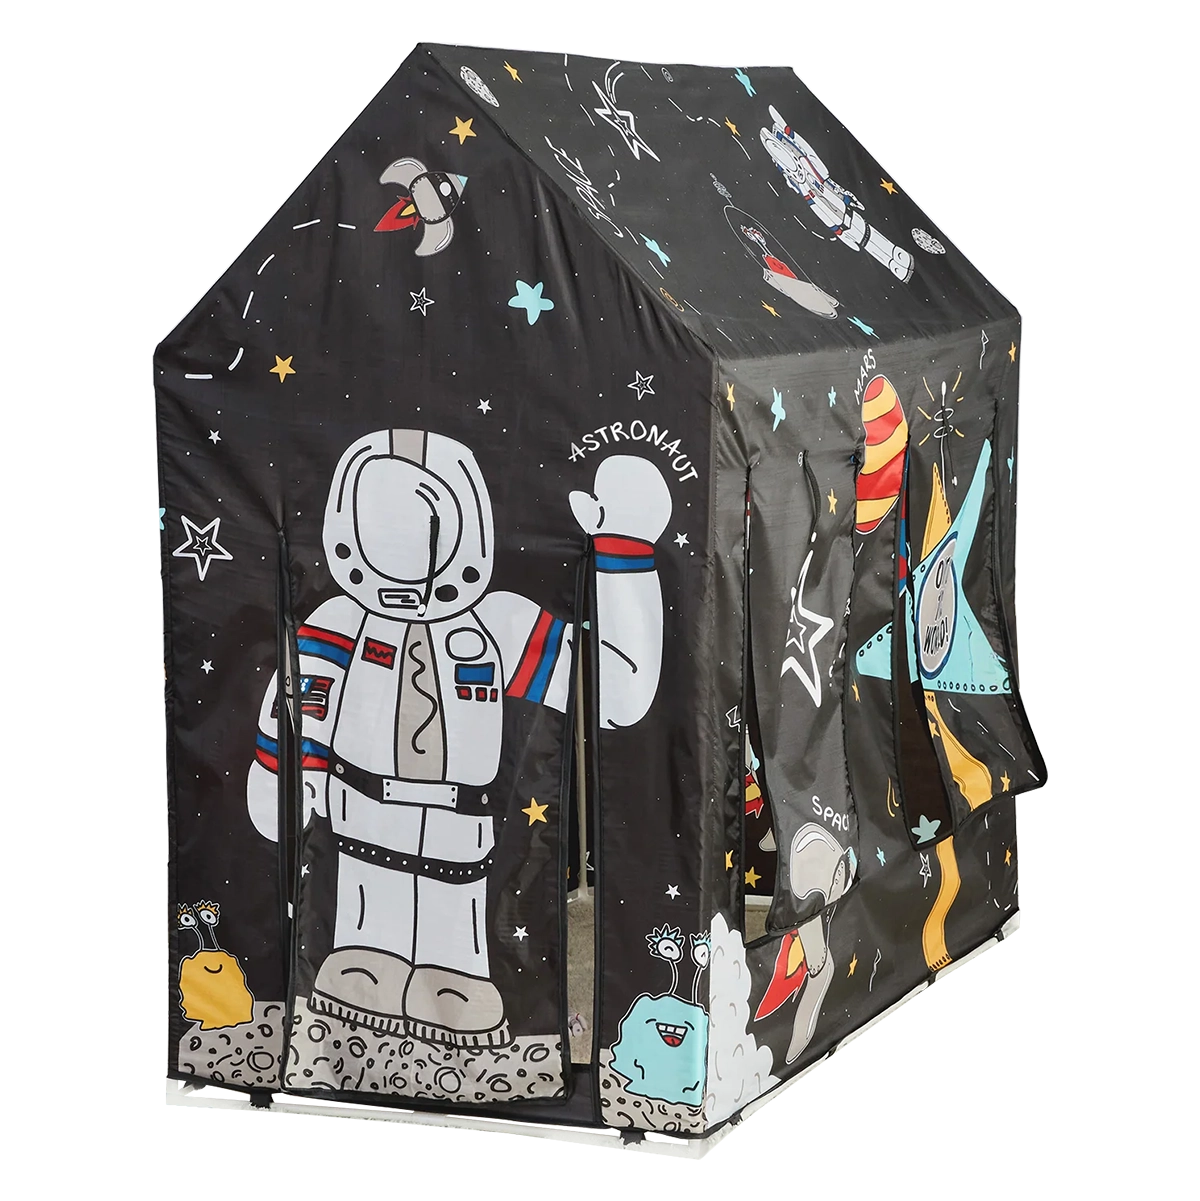 Regalo - Outer Space My Tent Portable Play Tent